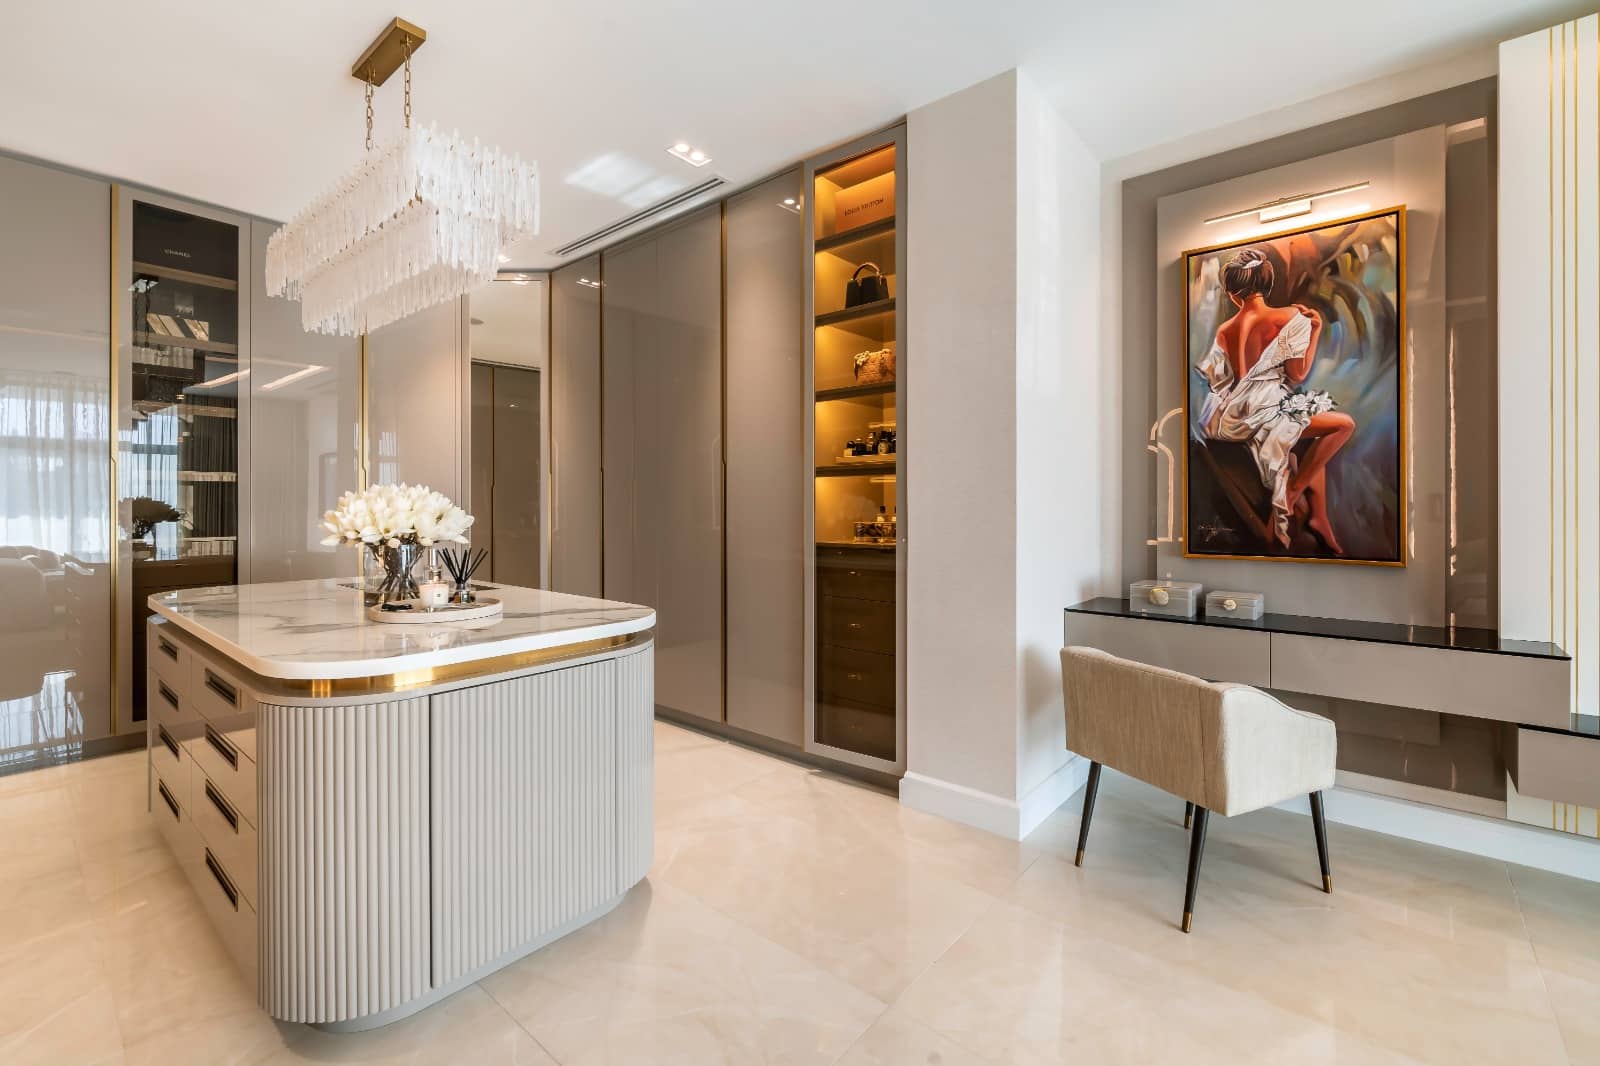 Polished Interiors transforms villas into personalized luxury